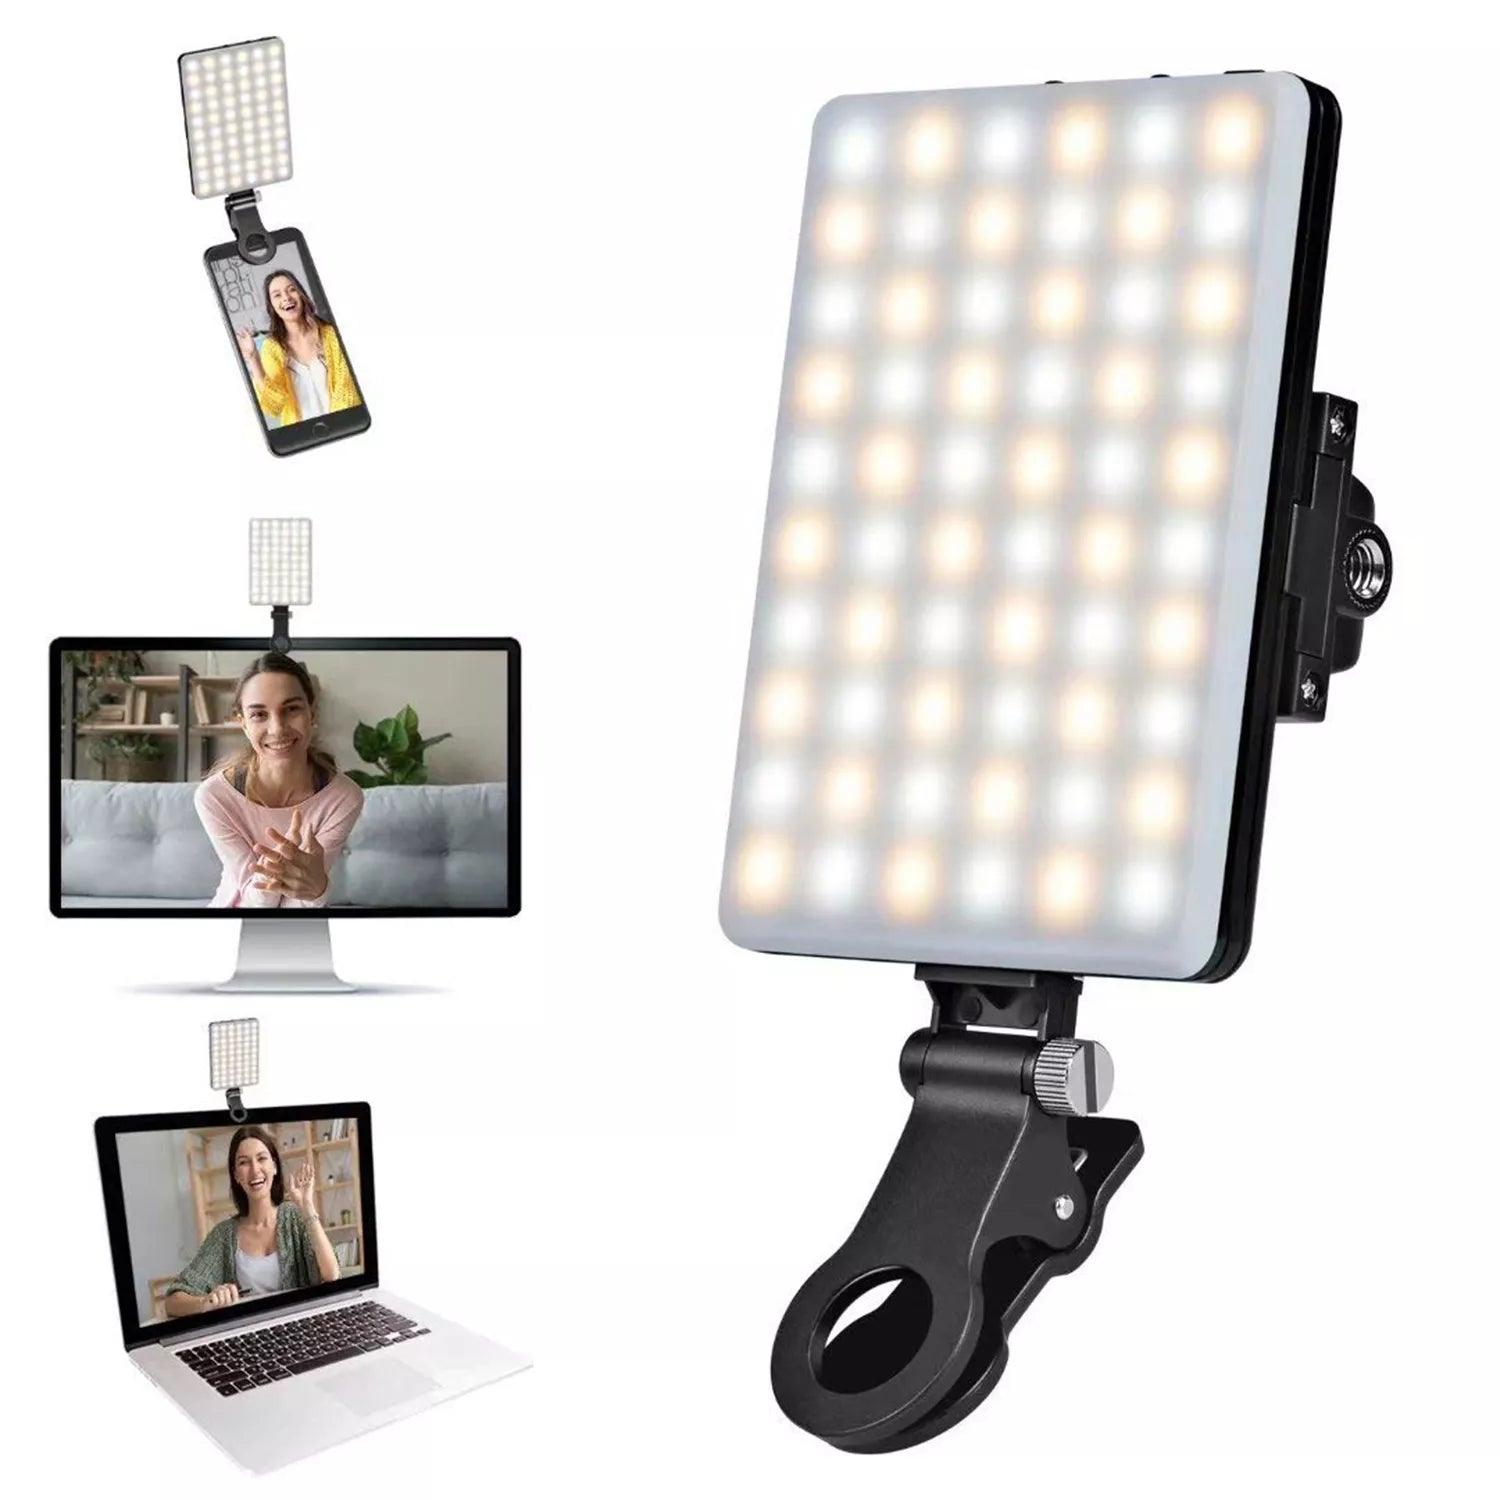 CAMOLO LED Fill Light Kit for Studio Lighting and Video Conferences  ourlum.com   